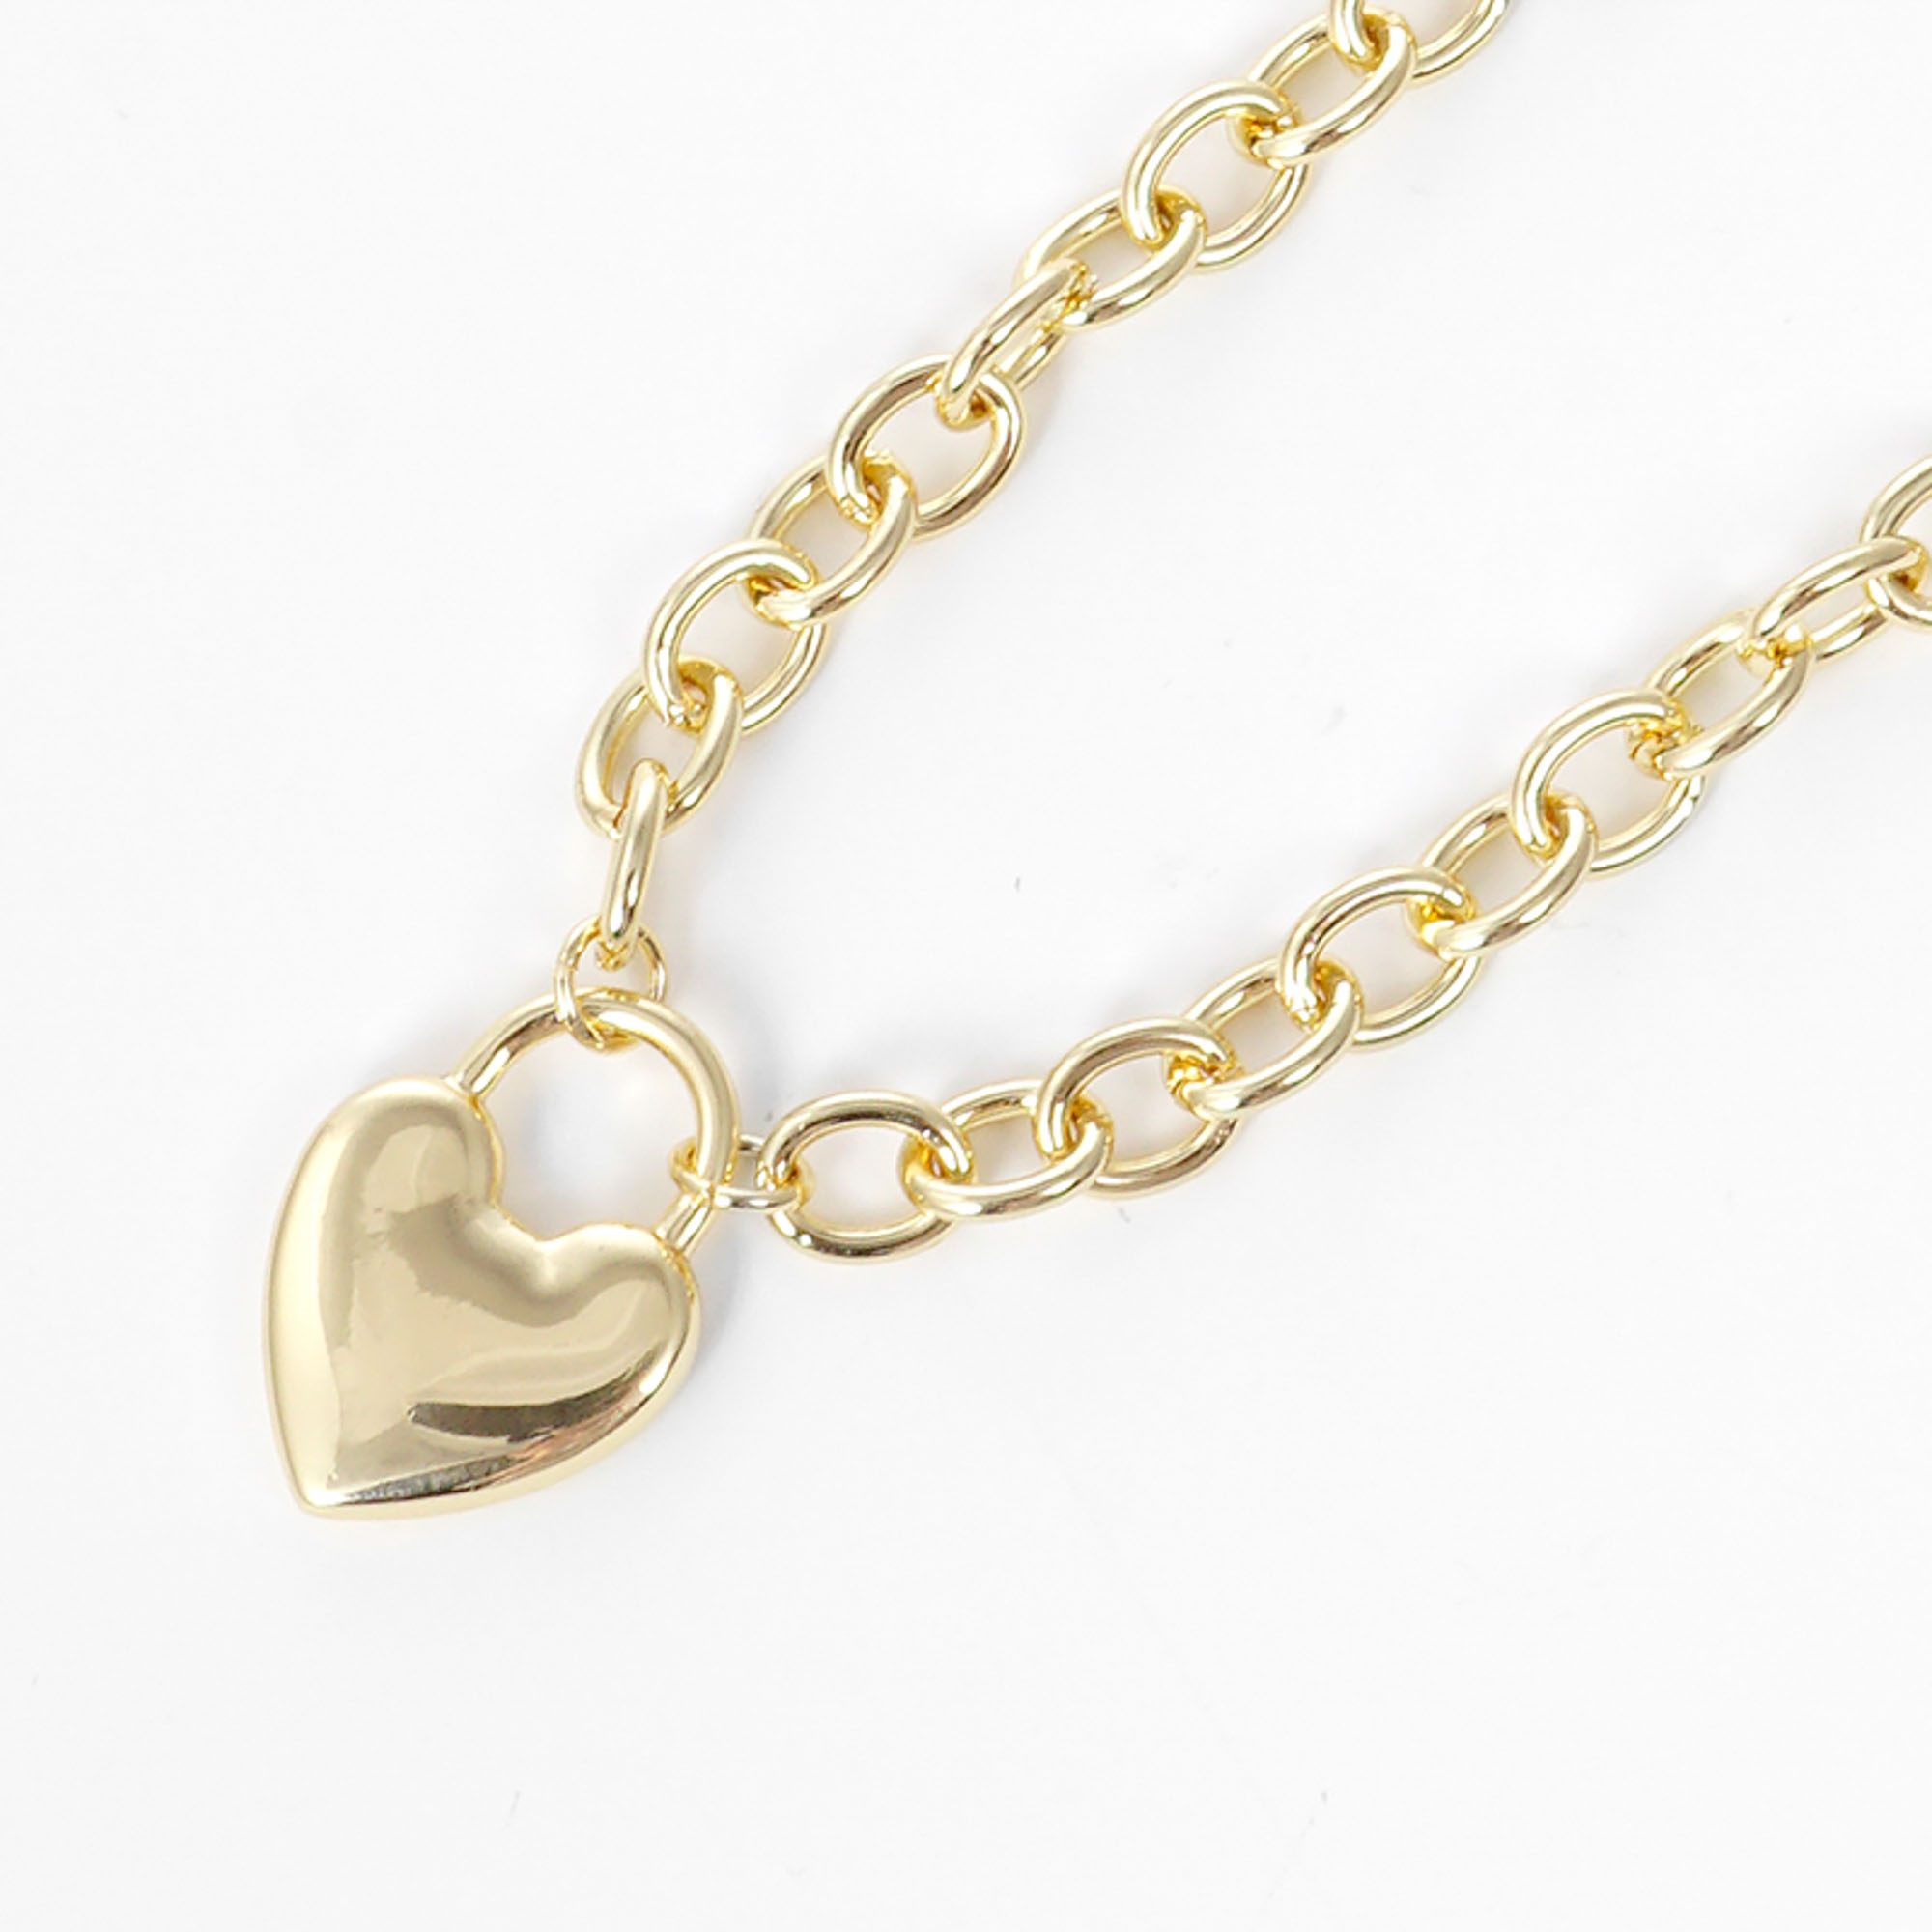 HEART CHARM CIRCLE LINK NECKLACE